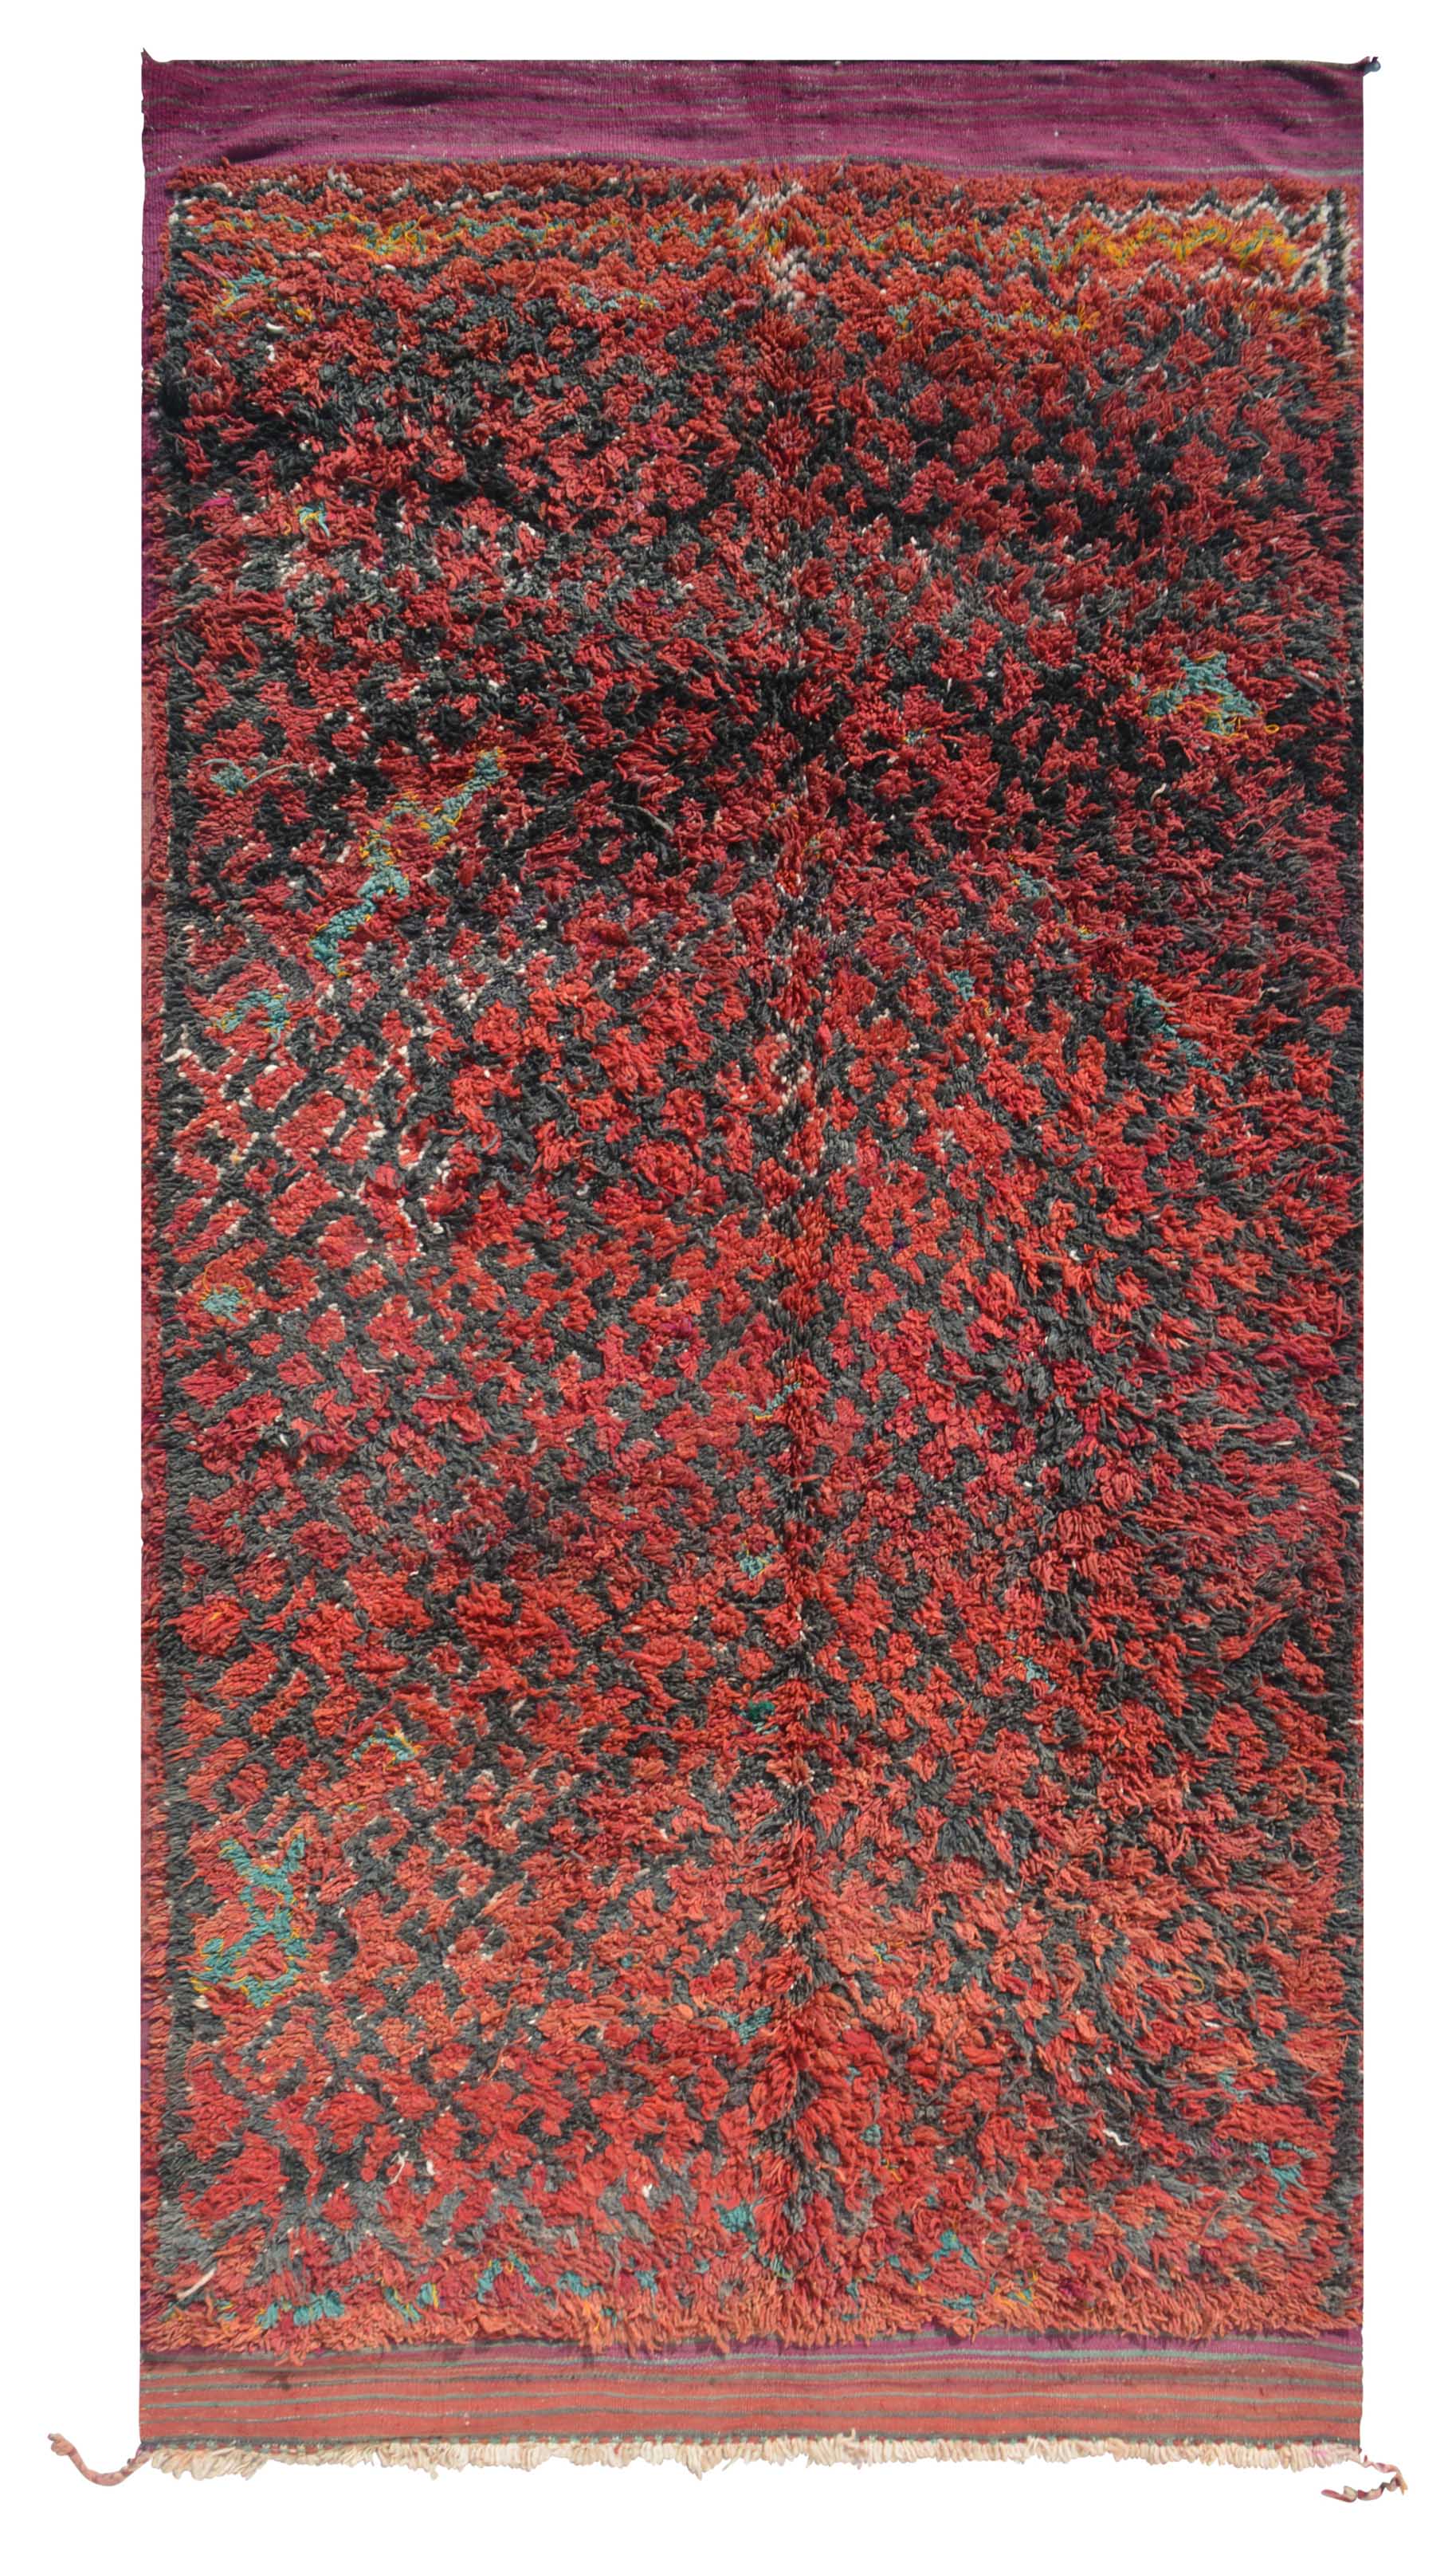 Vintage Moroccan Rug Shop Red and Pink Rug Vintage Moroccan Rug | Illuminate Collective illuminate collective 